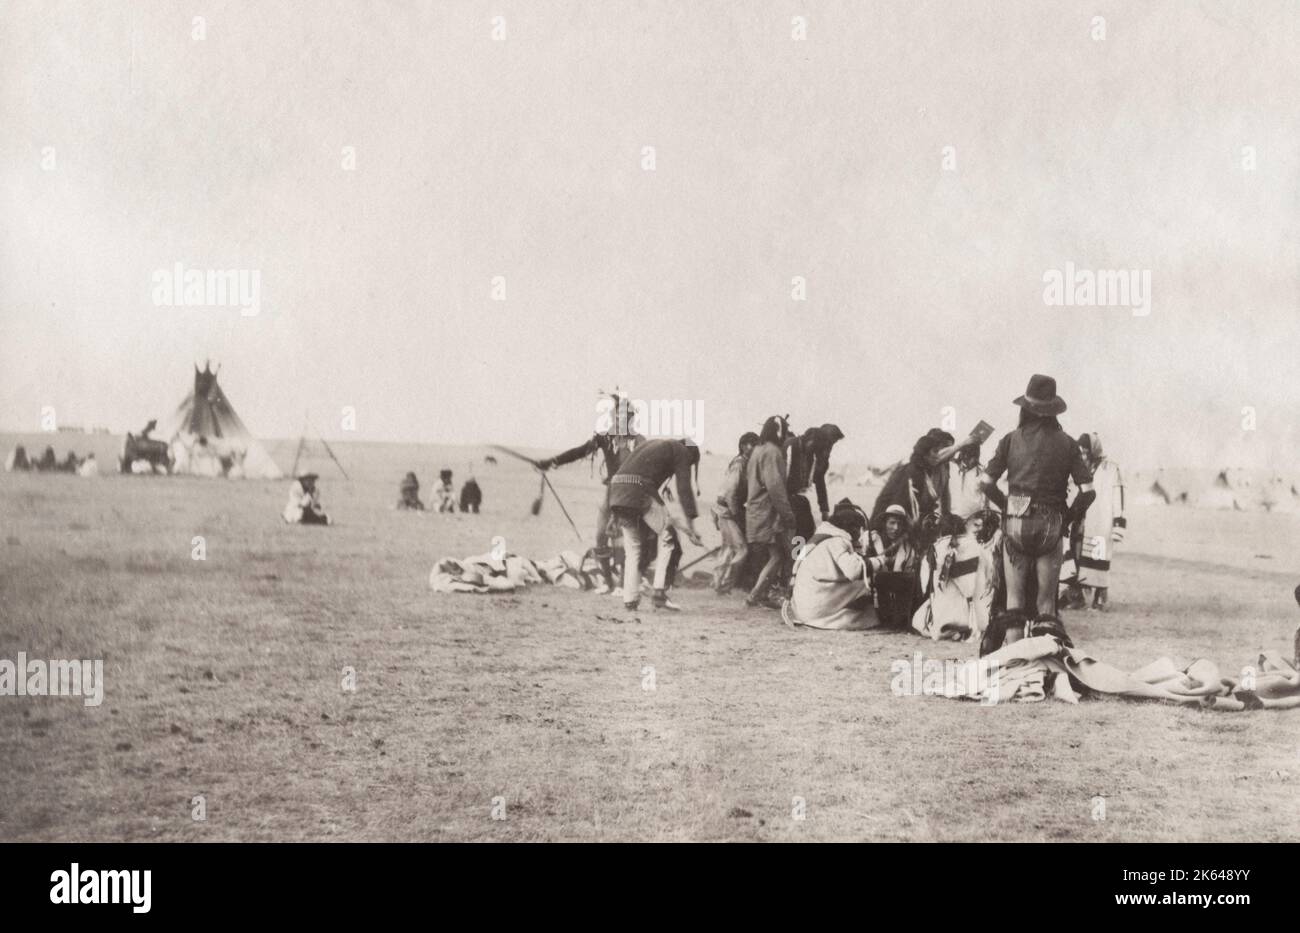 19th century vintage photograph - Native American, first nation peoples, Blackfoot Reserve, Canada, photograph William Notman, c.1880's. Caption reads: Indian Dance, Blackfoot Reserve. Stock Photo